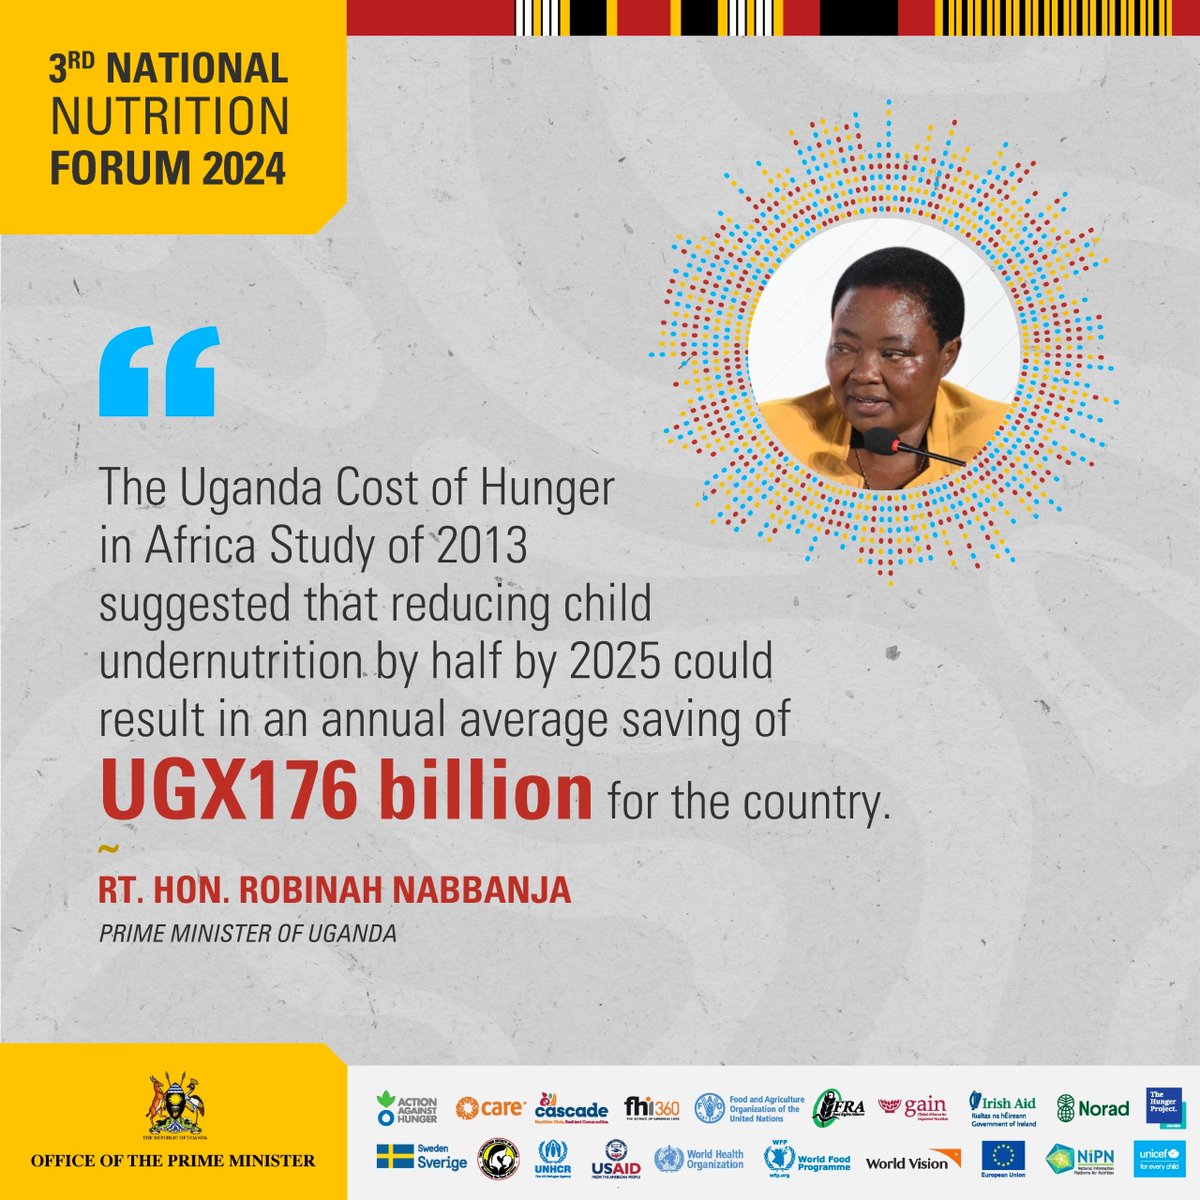 The Uganda Cost of Hunger in Africa Study of 2013 suggested that reducing child undernutrition by half by 2025 could result in an annual average saving of Ugandan Shillings 176 billion for the country according to the Prime Minister, @R_Nabbanja. #NationalNutritionForum2024